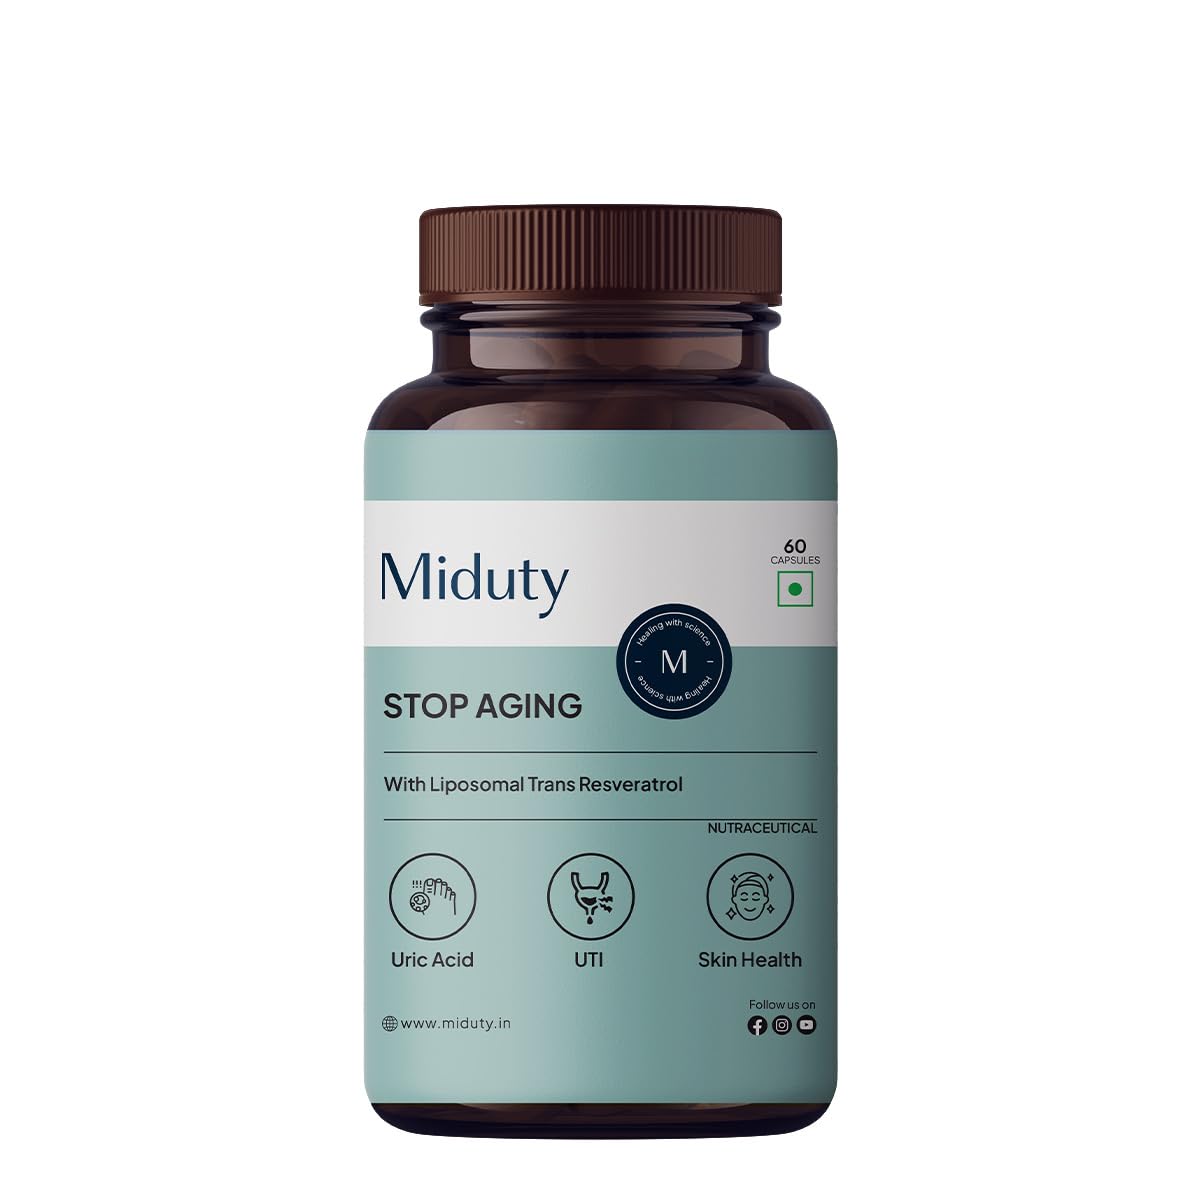 Miduty Palak Notes Powerful Antioxidant Formula To Slow Down Aging Anti-Aging Supplement For YouthfuCapsules, Resveratrol Active Ingredient Pack Of 60